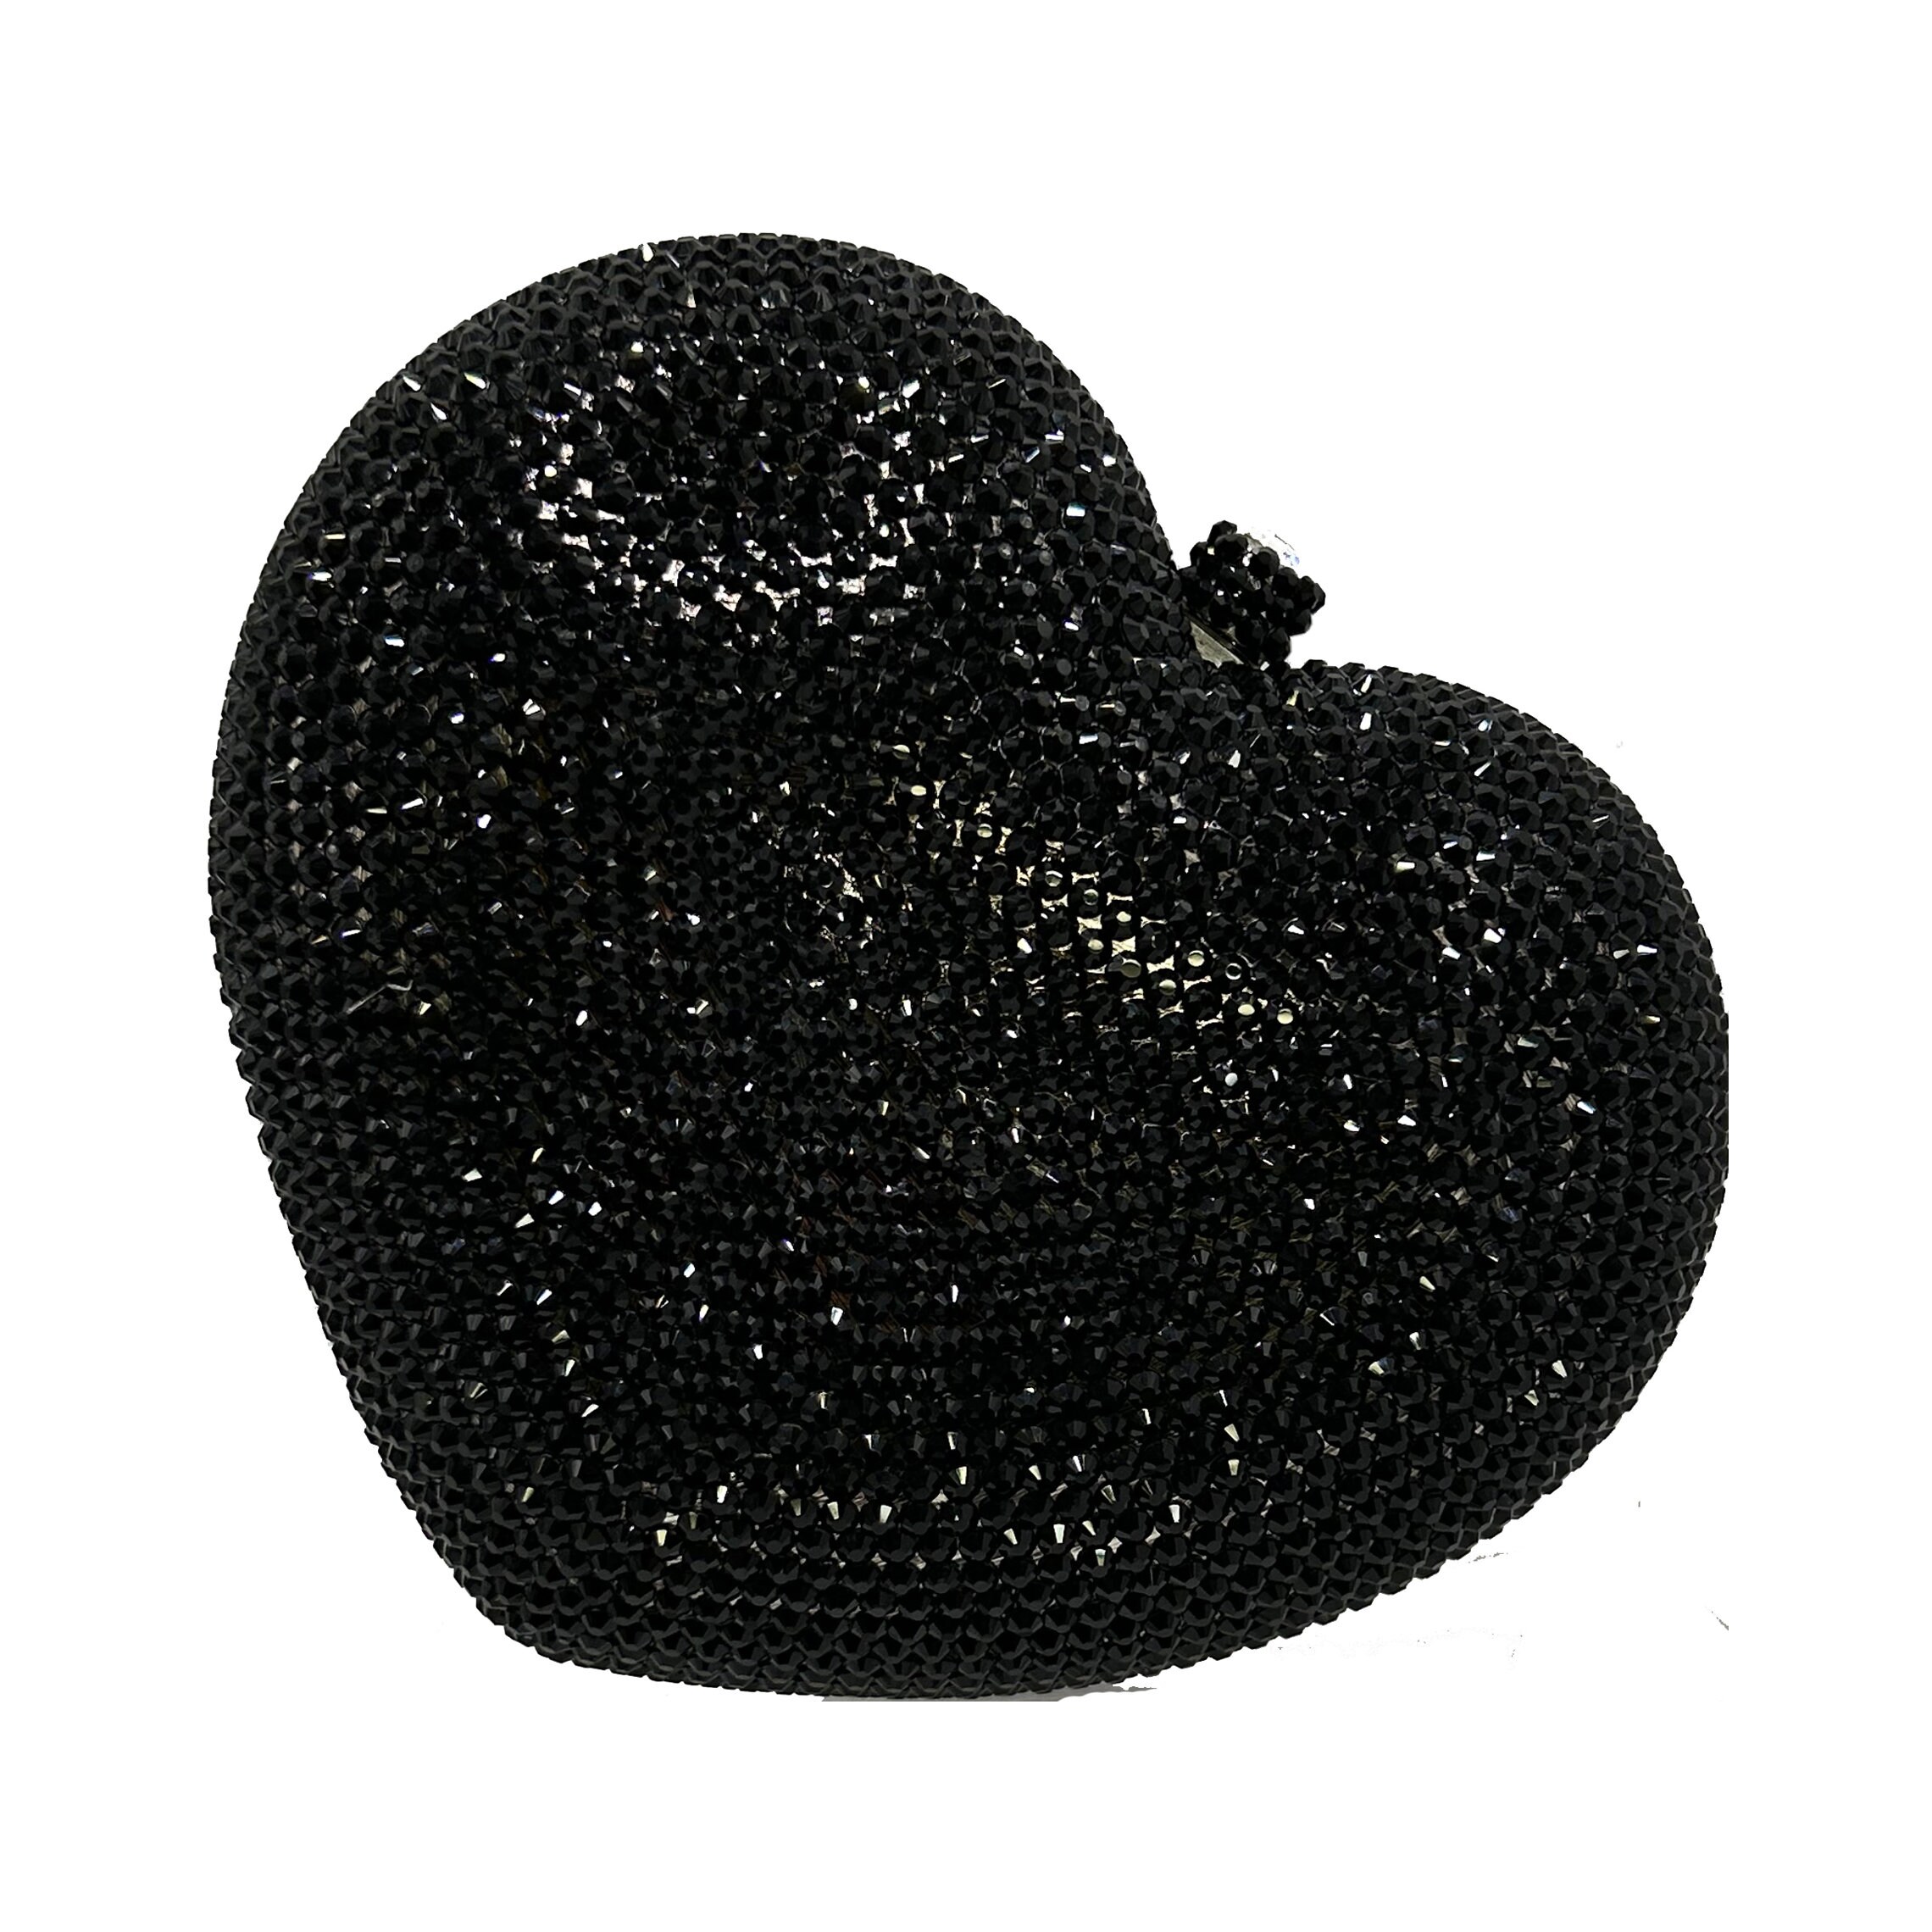 Valentines Heart Shaped Bag – Chyna Bling